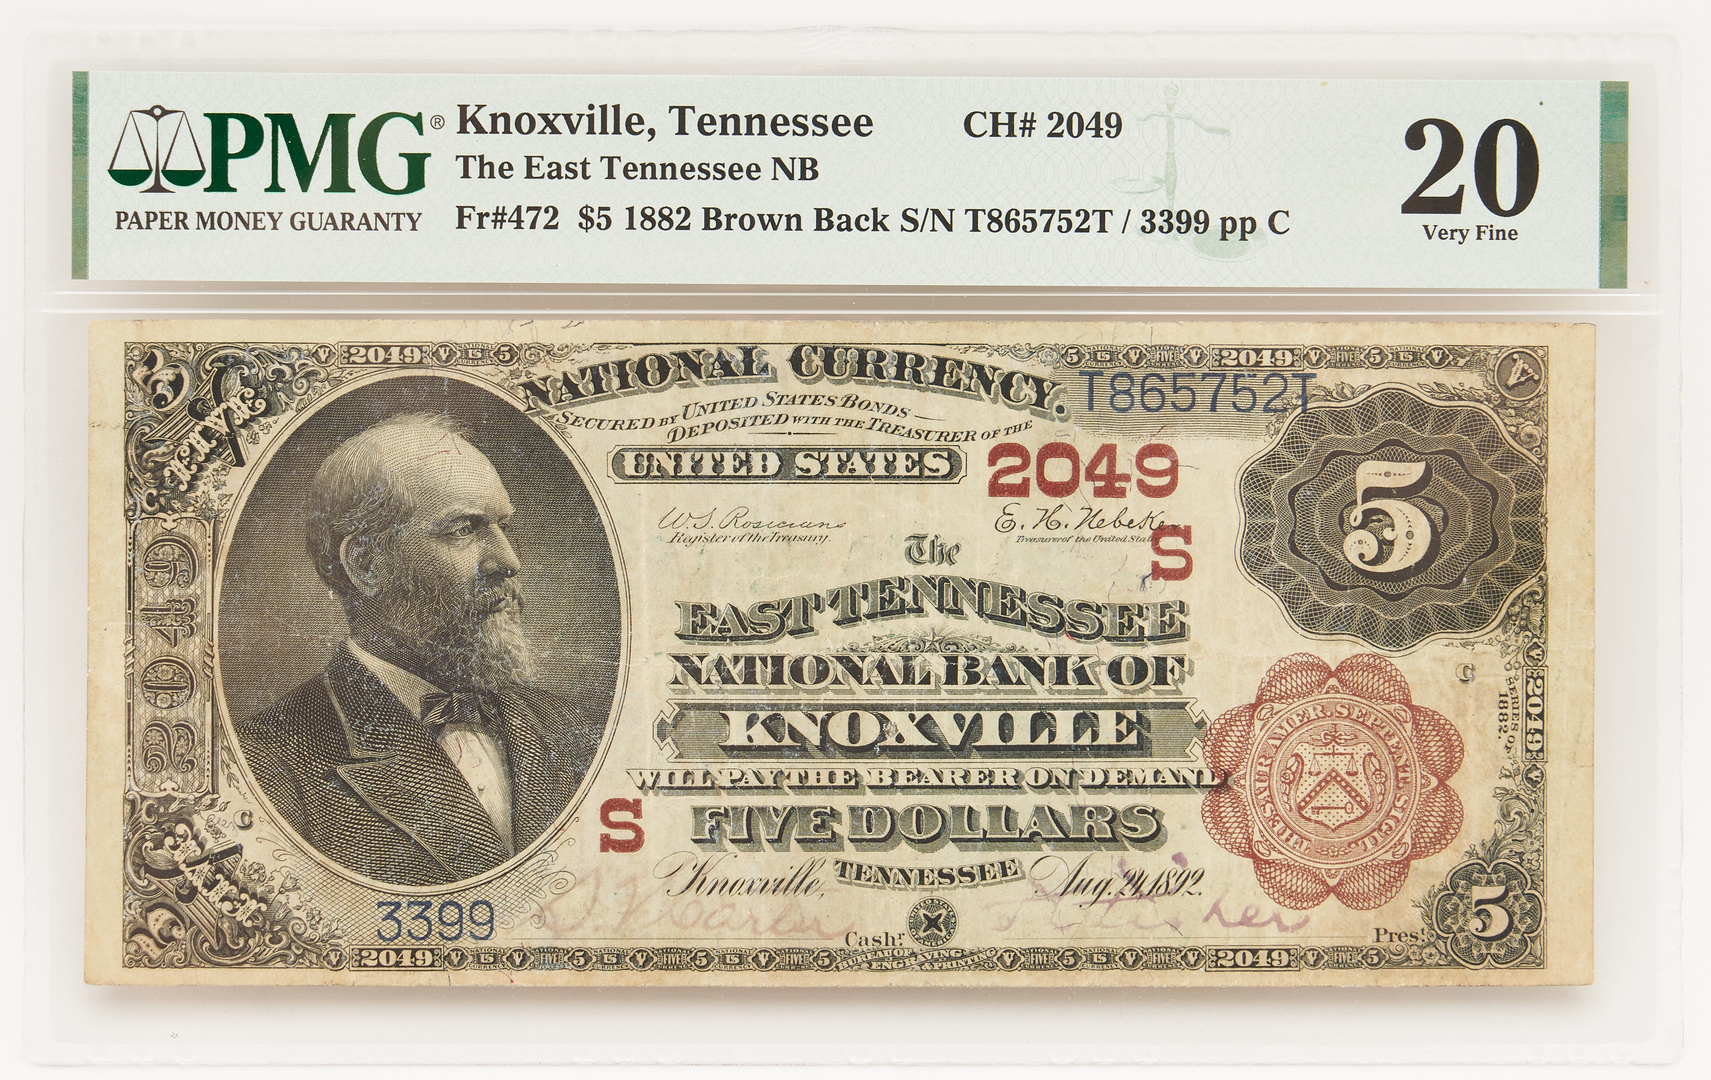 Lot 838: 1882 $5 Brown Back, The East Tennessee National Bank of Knoxville